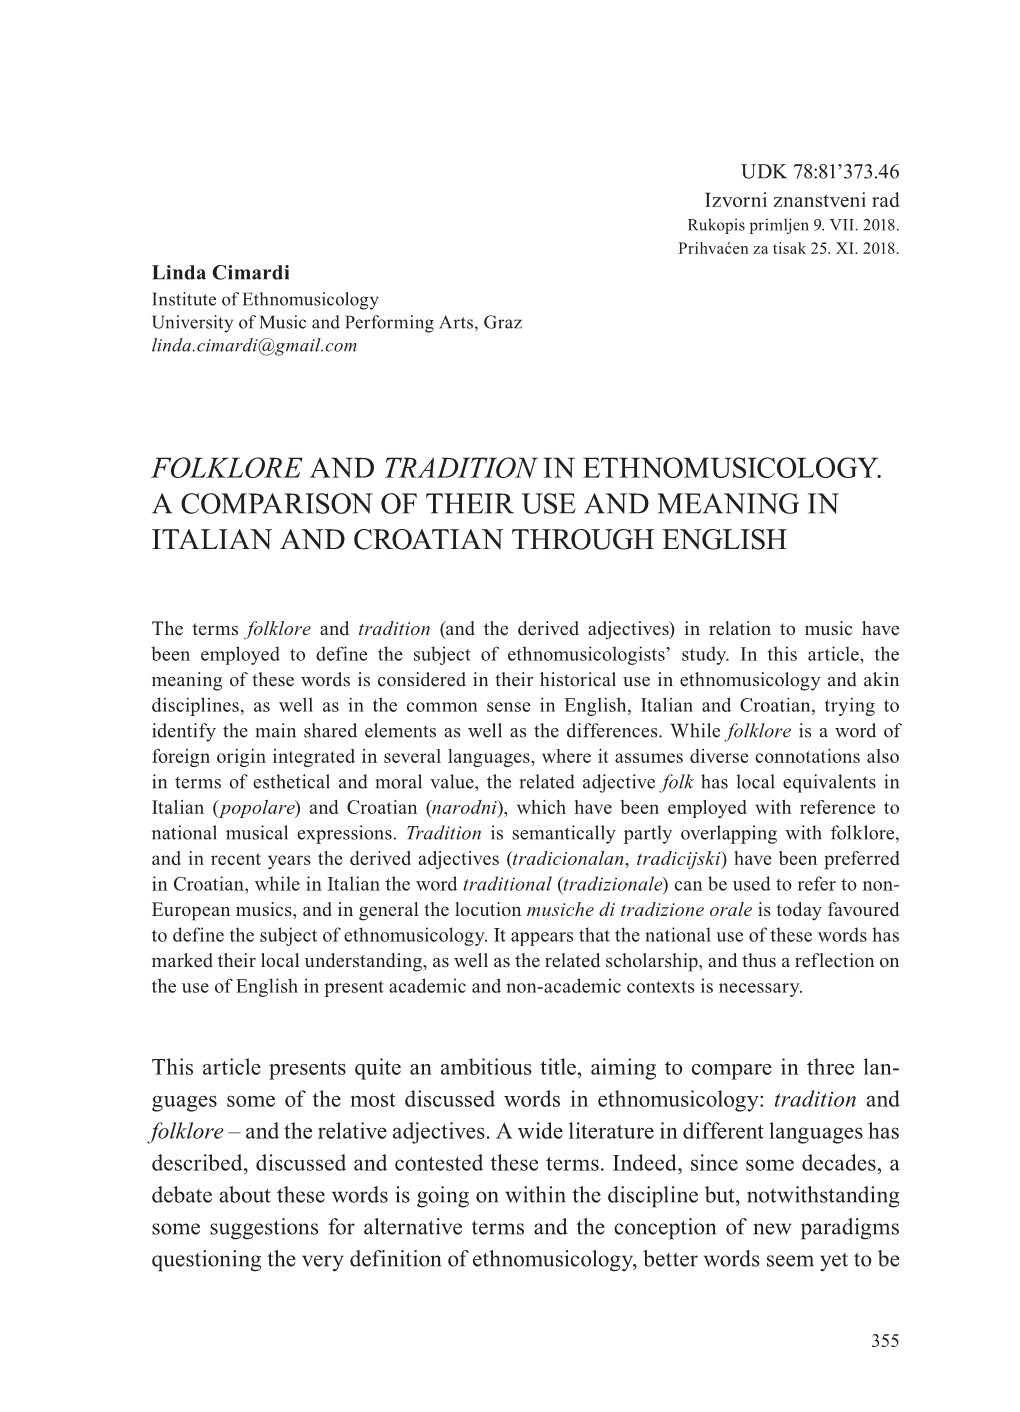 Folklore and Tradition in Ethnomusicology. a Comparison of Their Use and Meaning in Italian and Croatian Through English